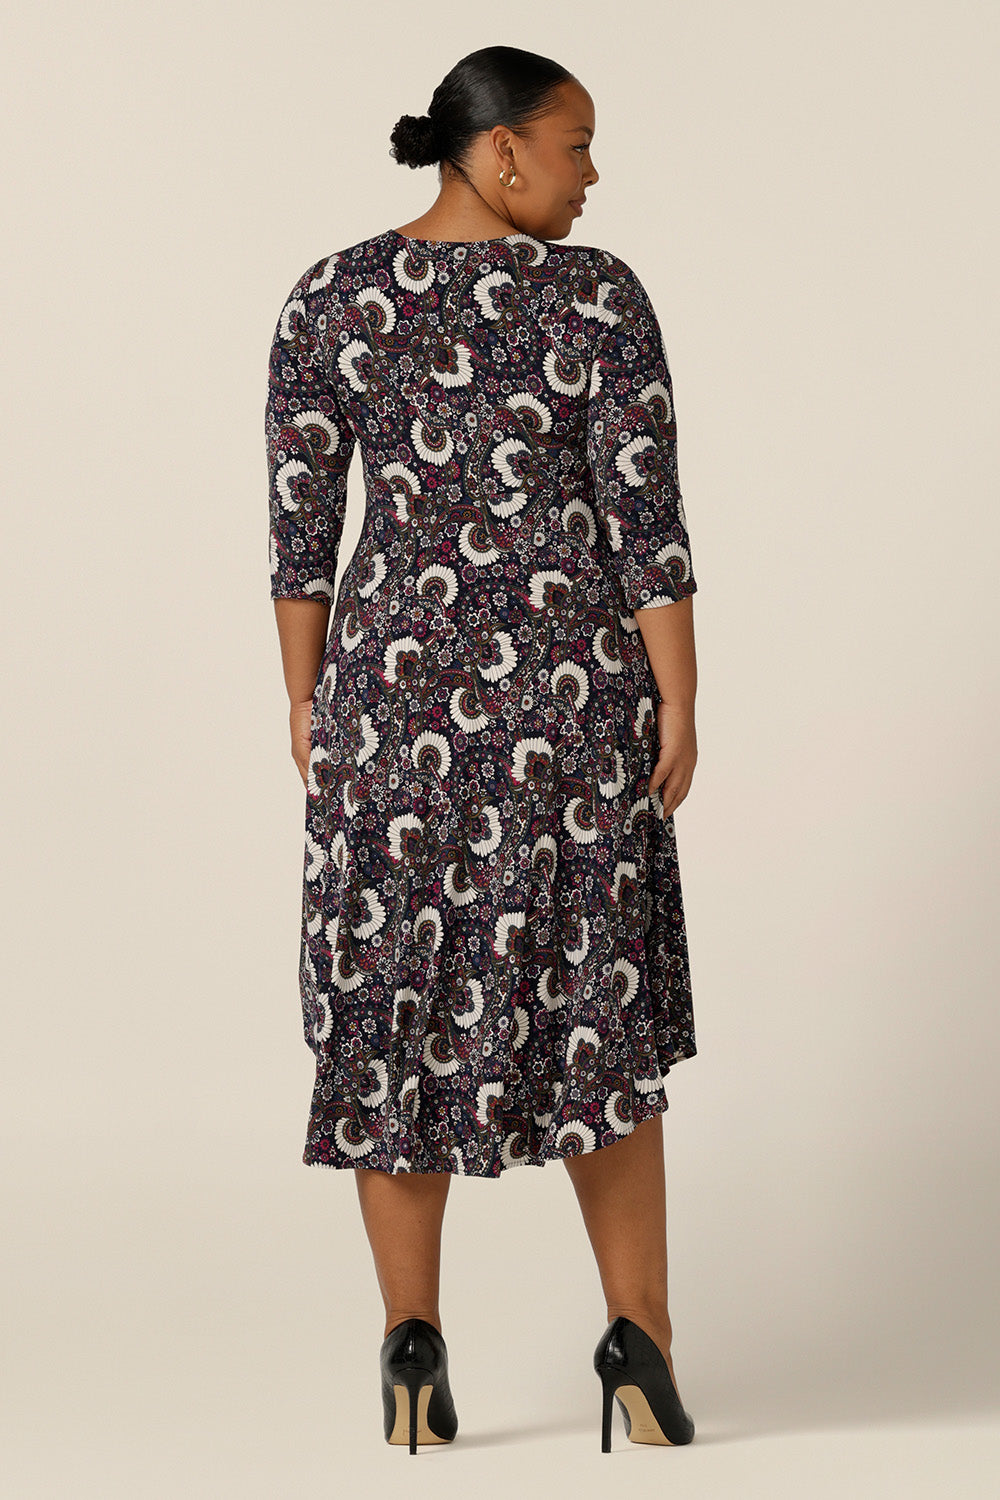 Back view of a size 18, plus size woman wearing a 3/4 sleeve empire line dress with twist front bodice ad dipped, calf length hem. Made in Australia by Australian and New Zealand women's fashion label, L&F this paisley print jersey dress is available to shop in petite to plus sizes.